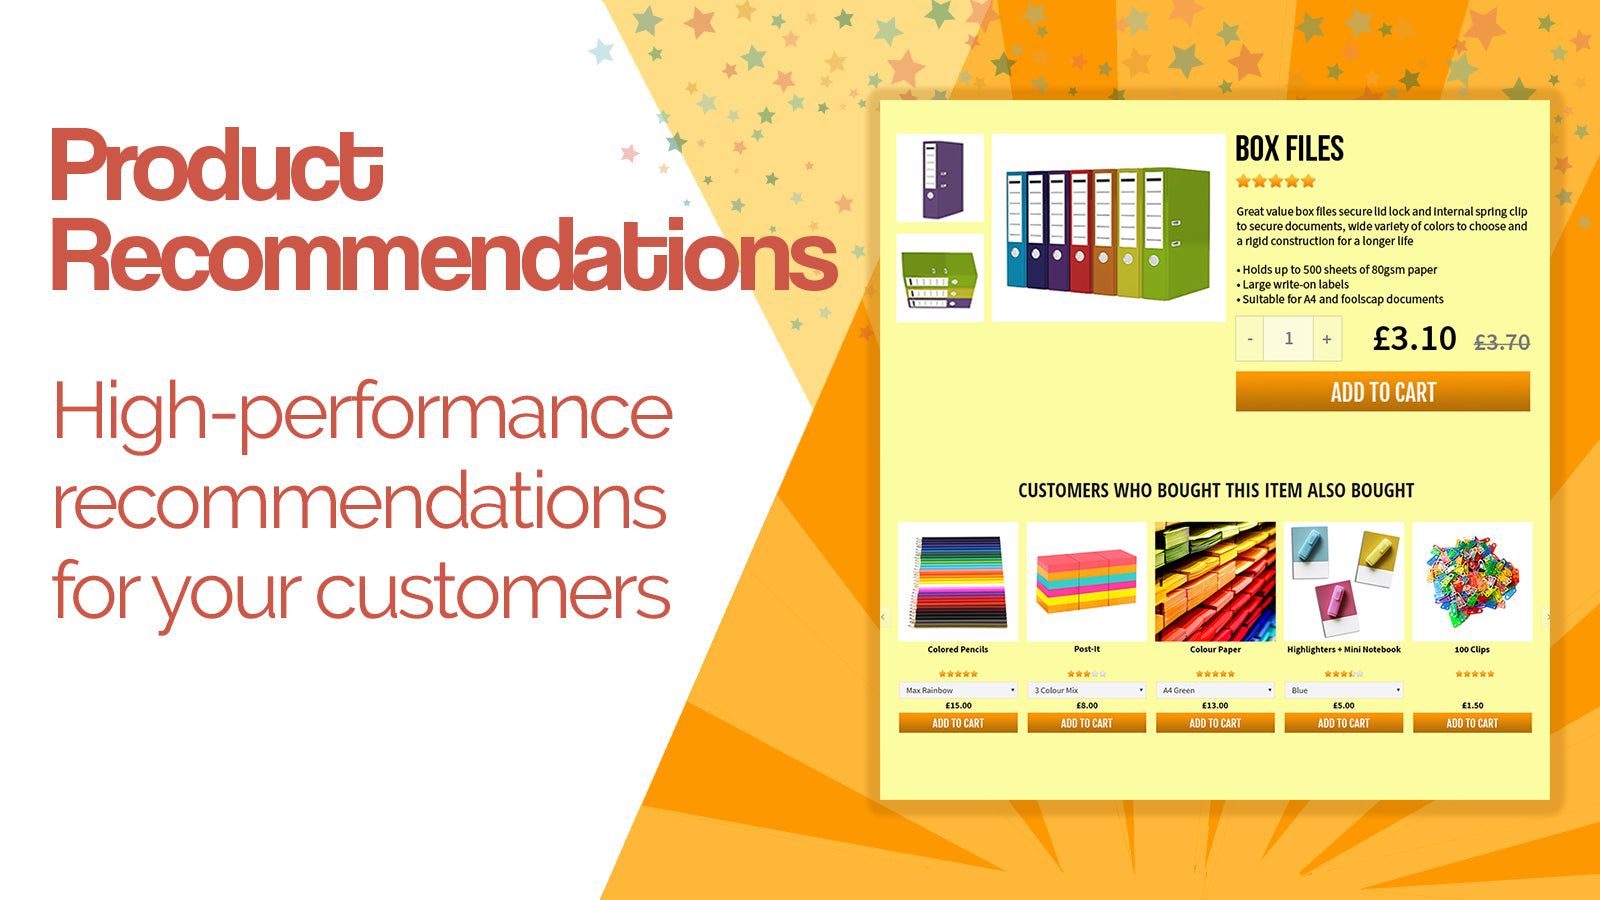 Excellent recommendations for your customers